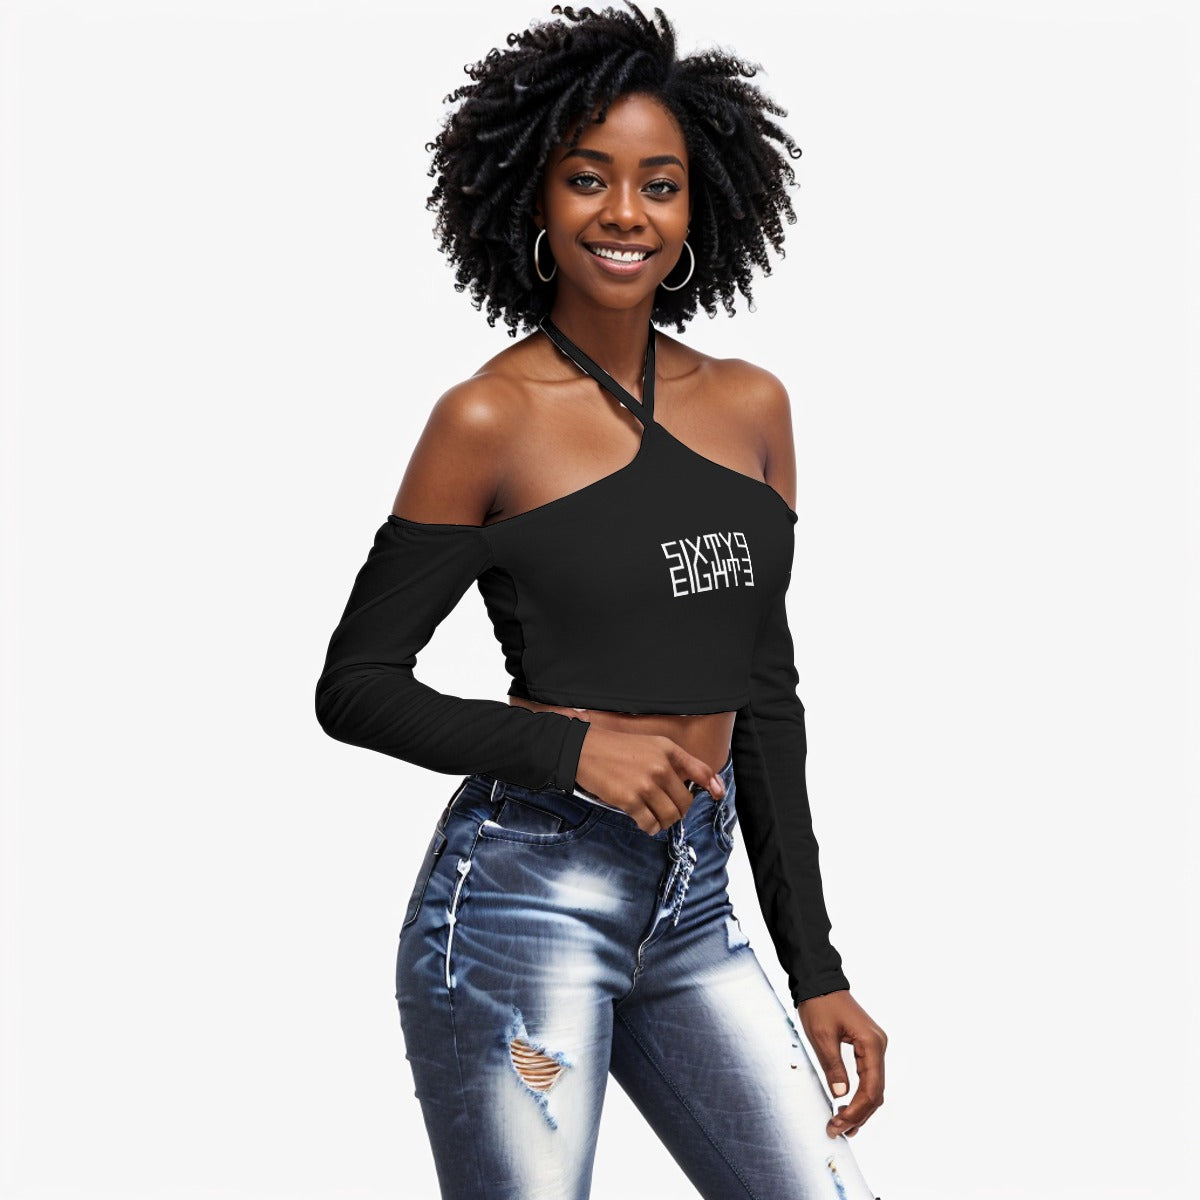 Sixty Eight 93 Logo White Black Women's Halter Lace-Up Top